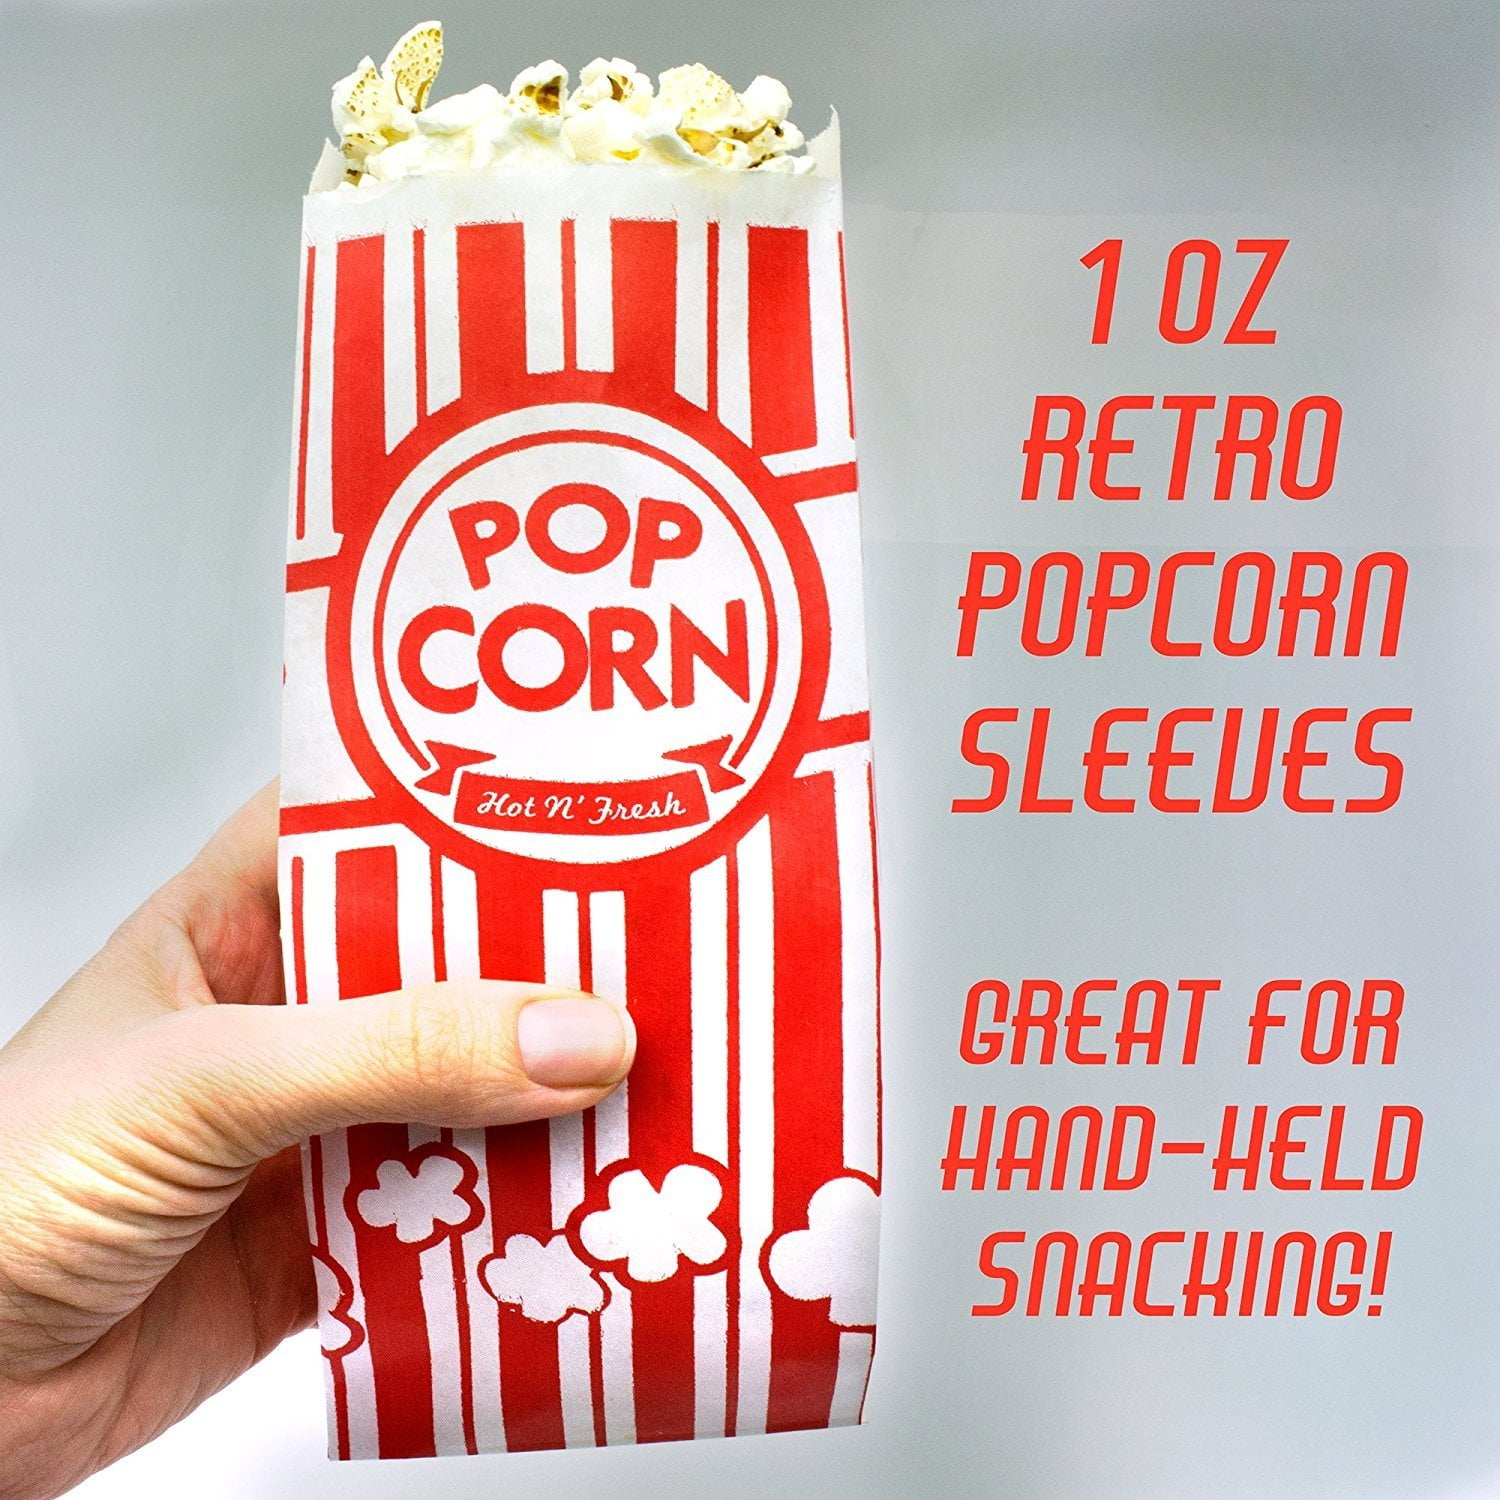 Great Movie Theme Party Supplies or Old Fashioned Carnivals /& Fundraisers! Popcorn Bags 100 Pack Coated for Leak//Tear Resistance Single Serving 2oz Paper Sleeves in Nostalgic Red//White Design